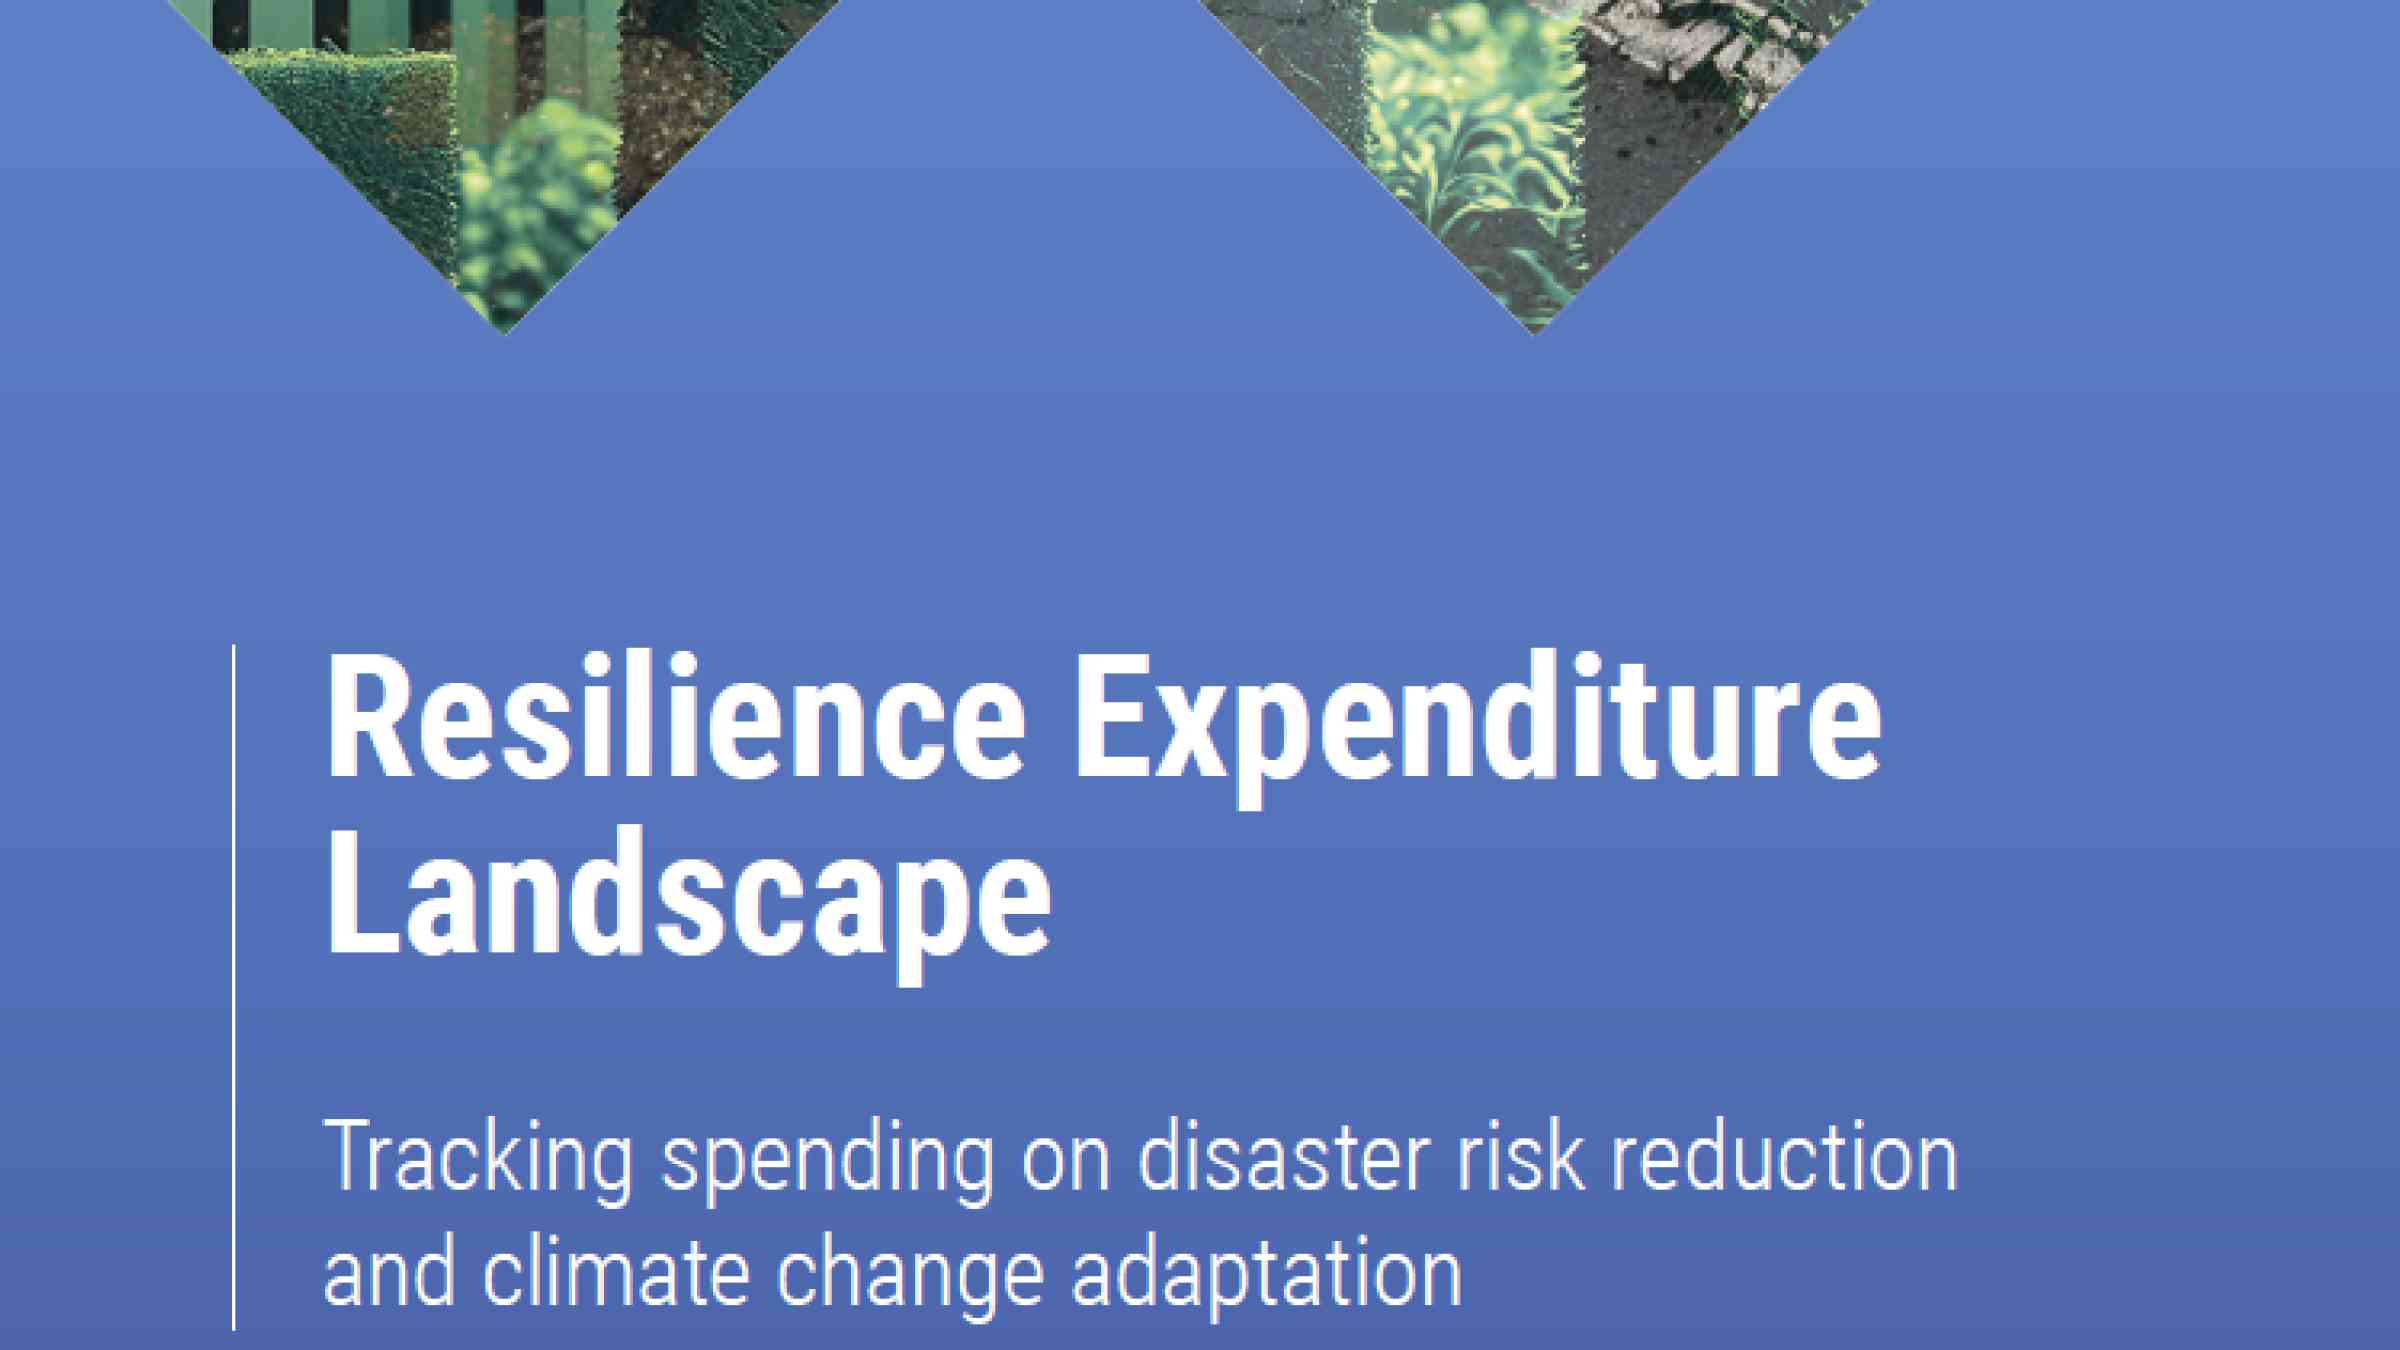 Tracking spending on DRR and CCA 